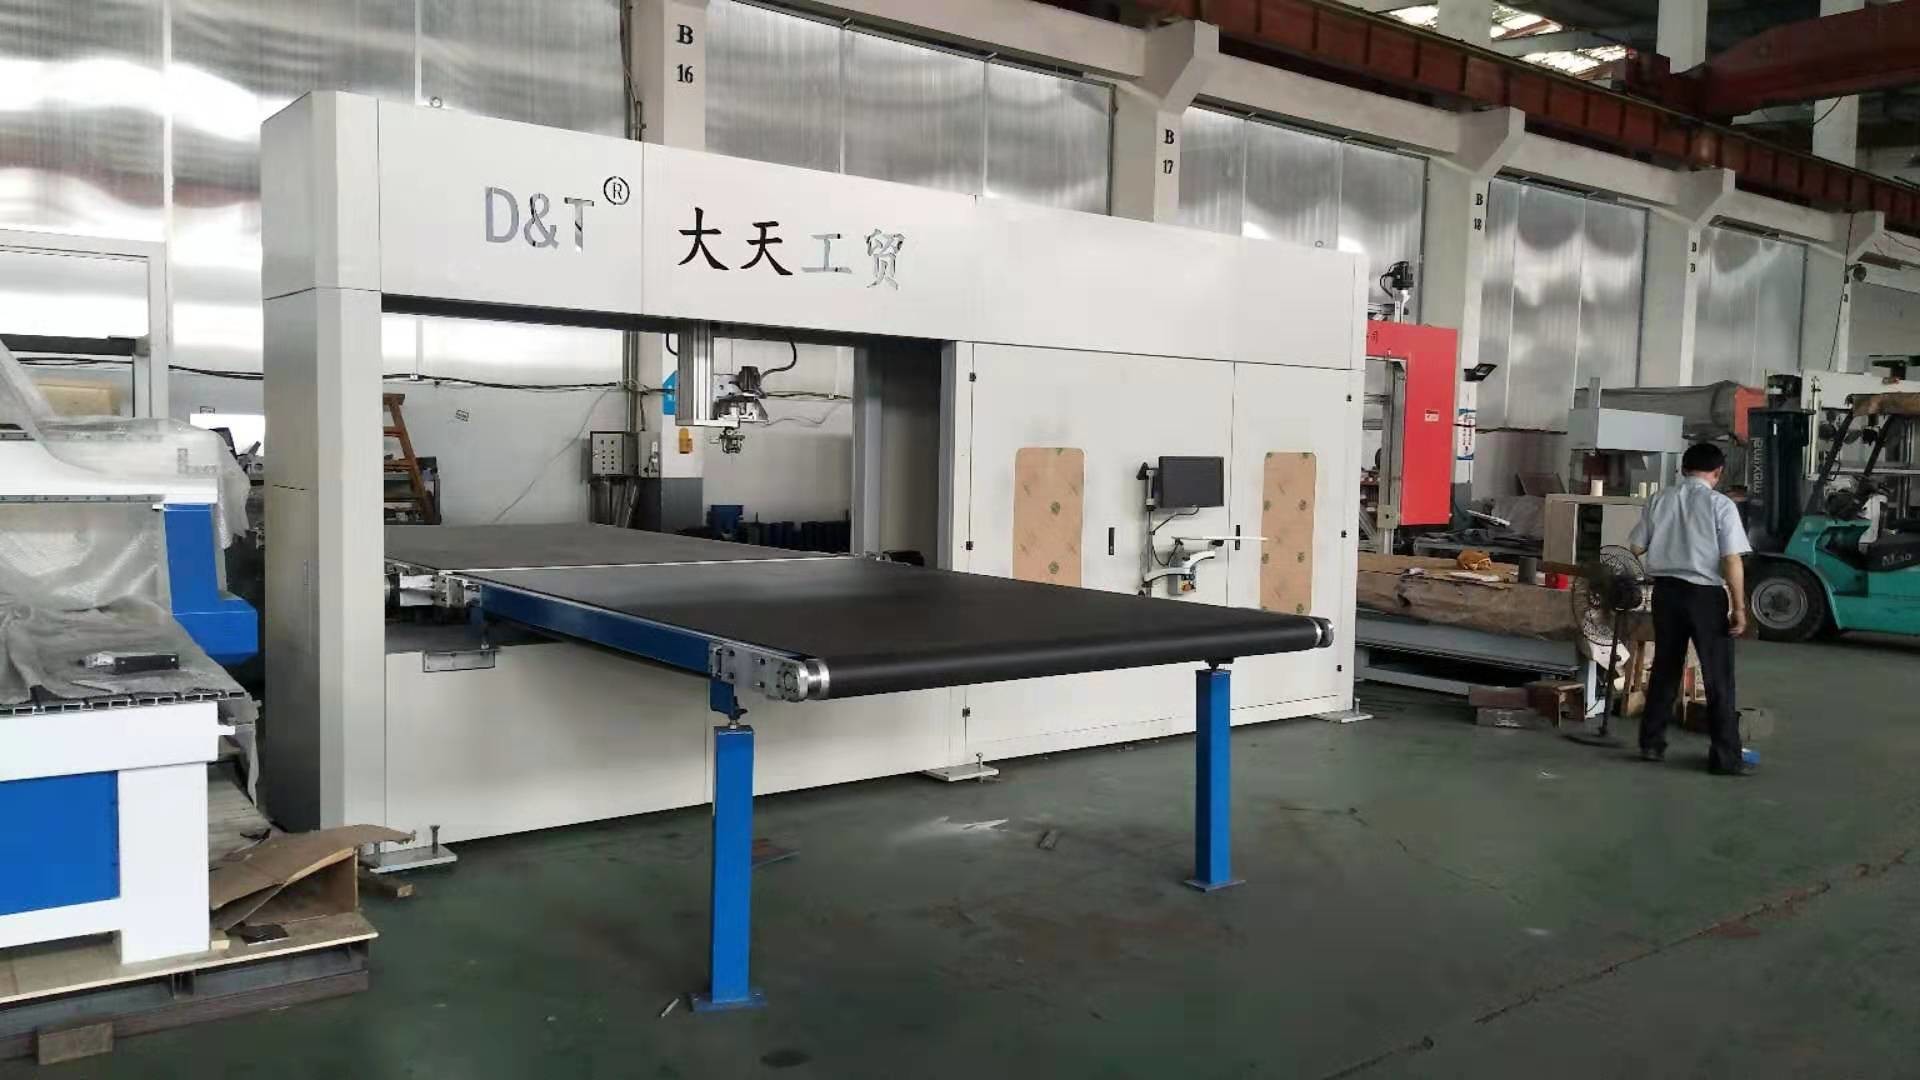 Vertical Sponge Cutting Machine With Revolving Knife DTC-R2012V 5kw